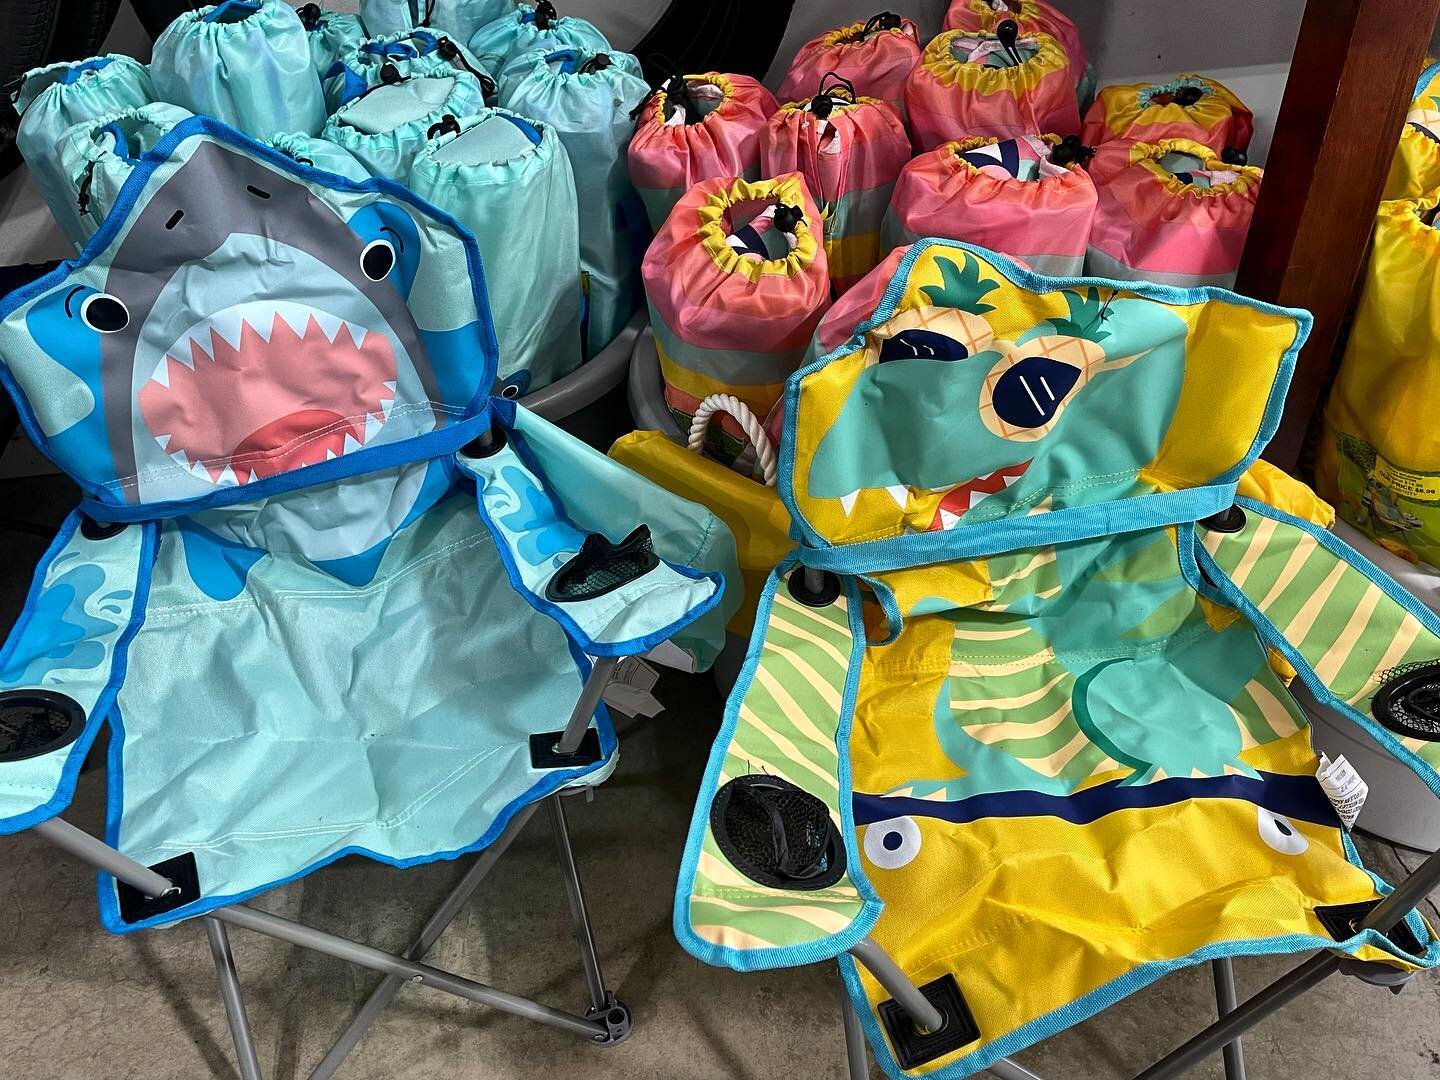 Kids beach chairs just hit the floor&hellip;. Come on in and see what else the RML crew has put out this week!!!